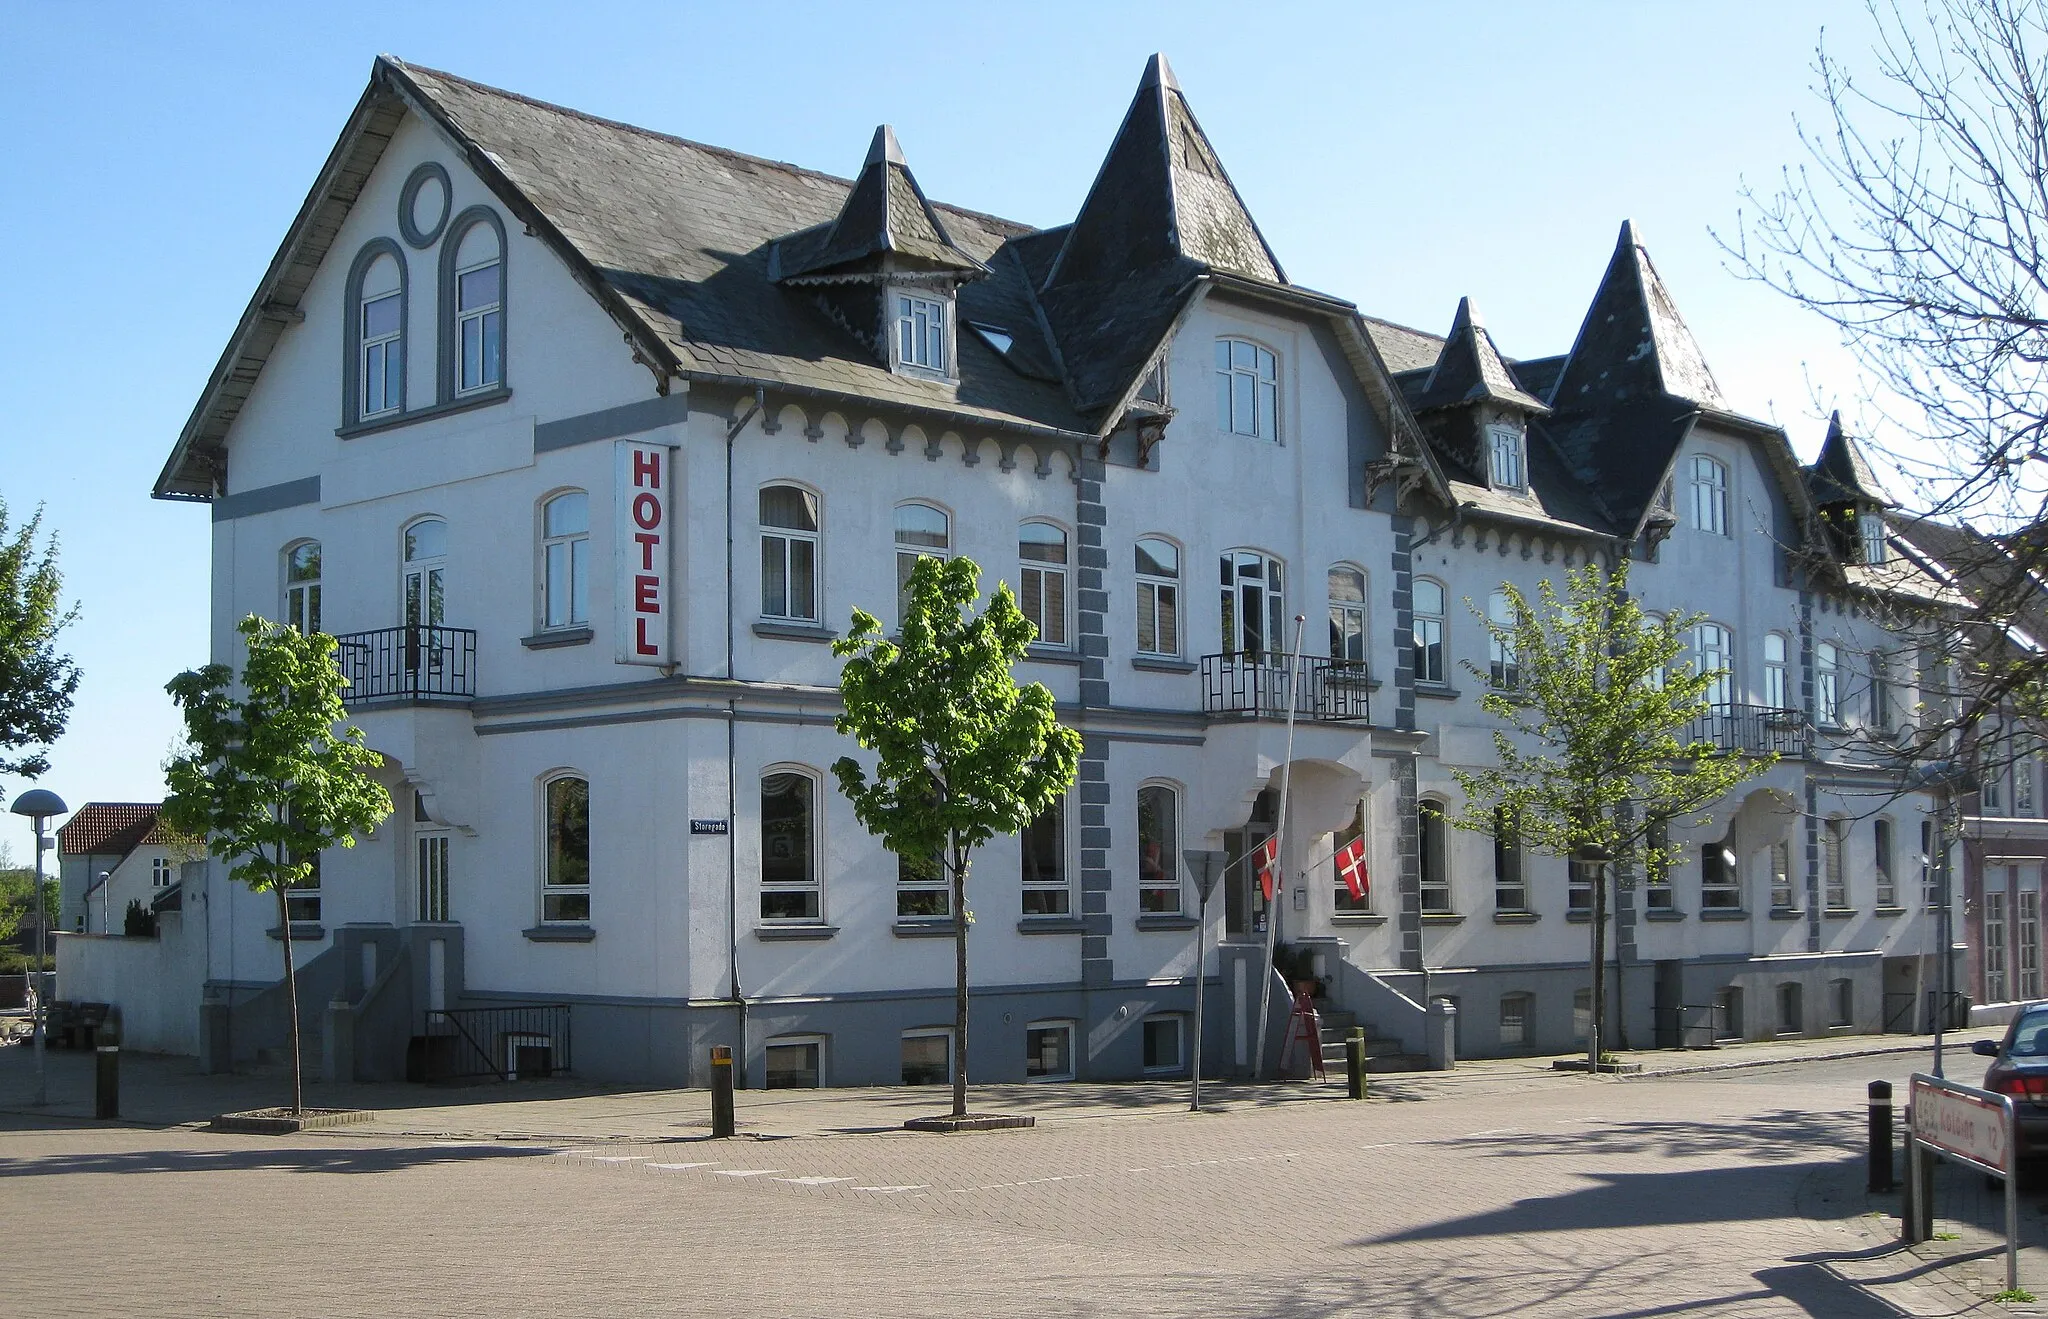 Photo showing: The hotel "Hotel Lunderskov" in the small town "Lunderskov". The town is located in Kolding Kommune, South-Central Jutland, Denmark.